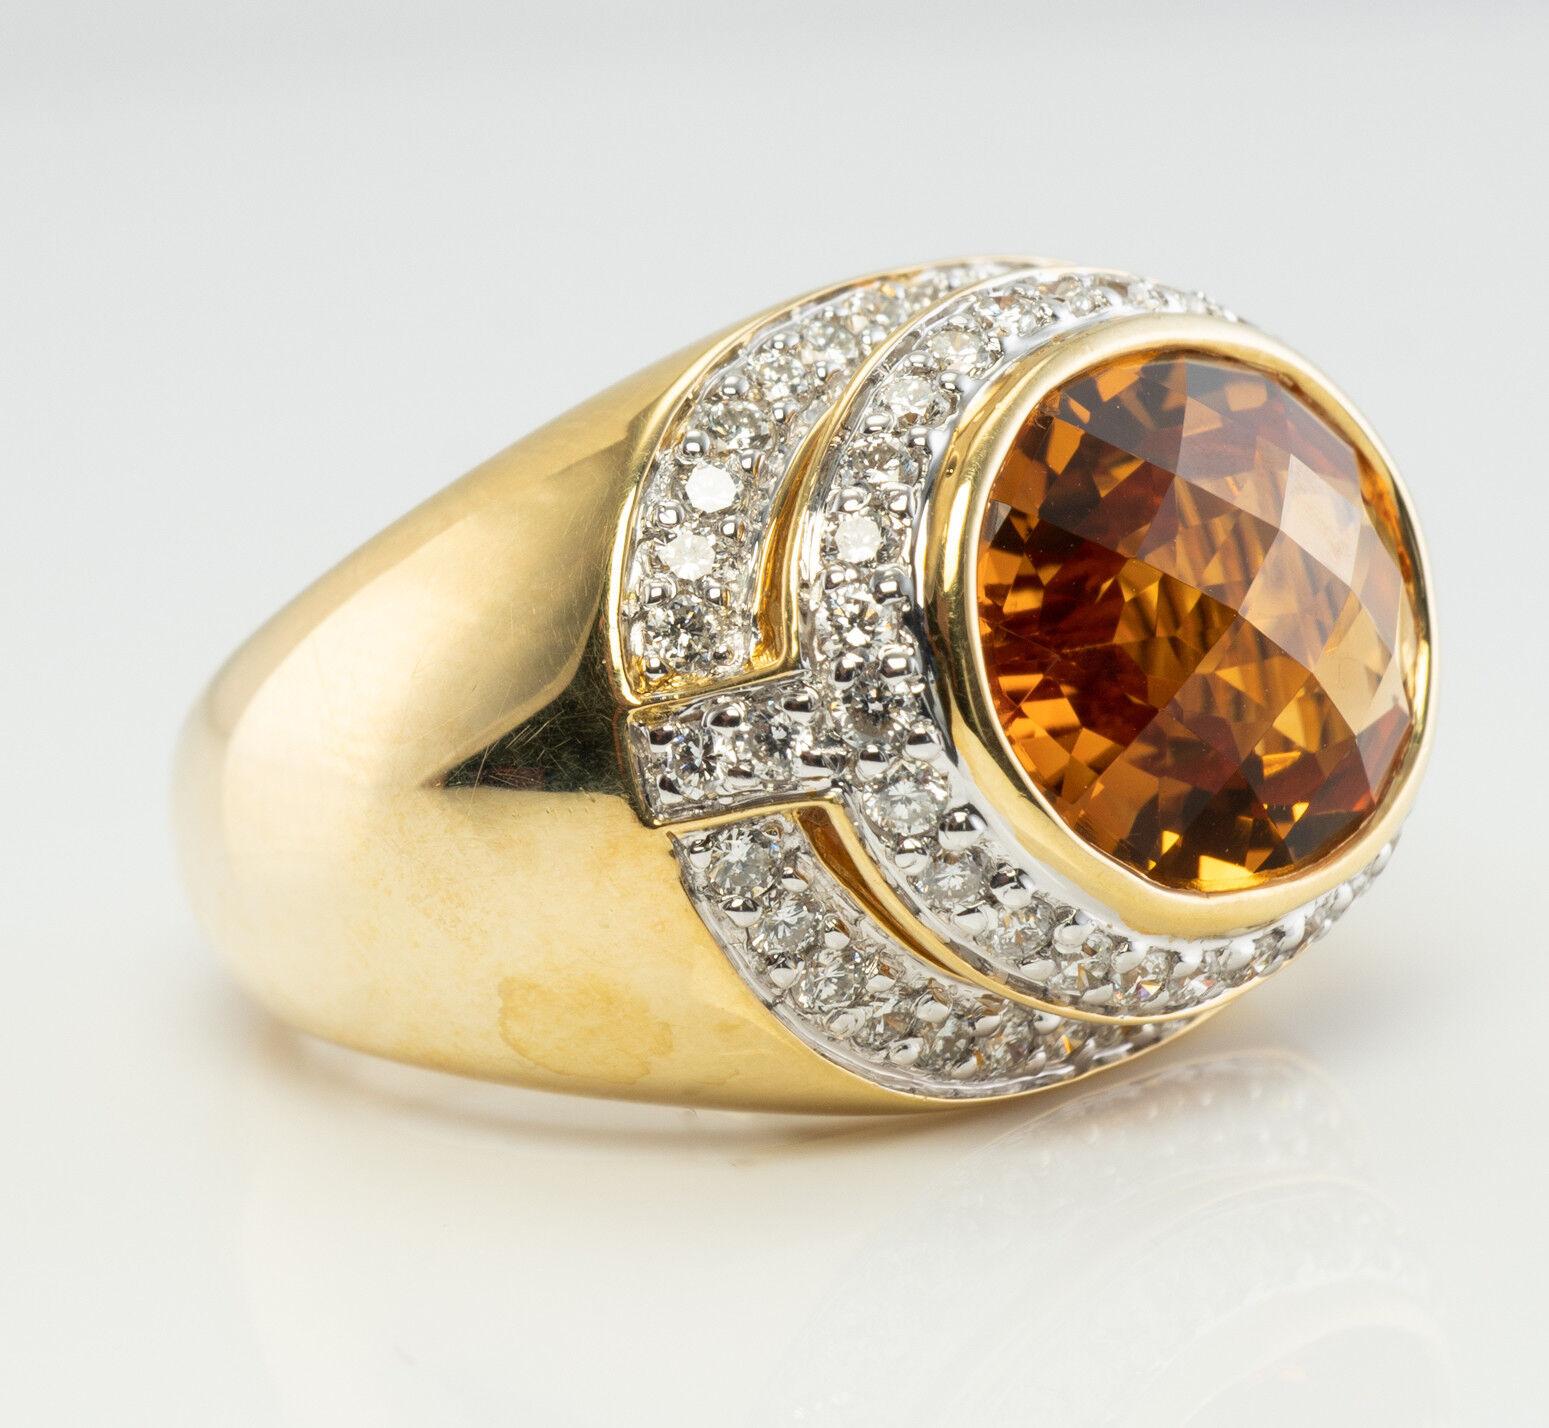 This extraordinary ring is made by New York designer Kristina. The ring is crafted in solid 18K Yellow Gold and set with genuine Earth mined Citrine and dazzling white diamonds. The center checkerboard cut Citrine measures 13mm x 10mm (5.45 carats).